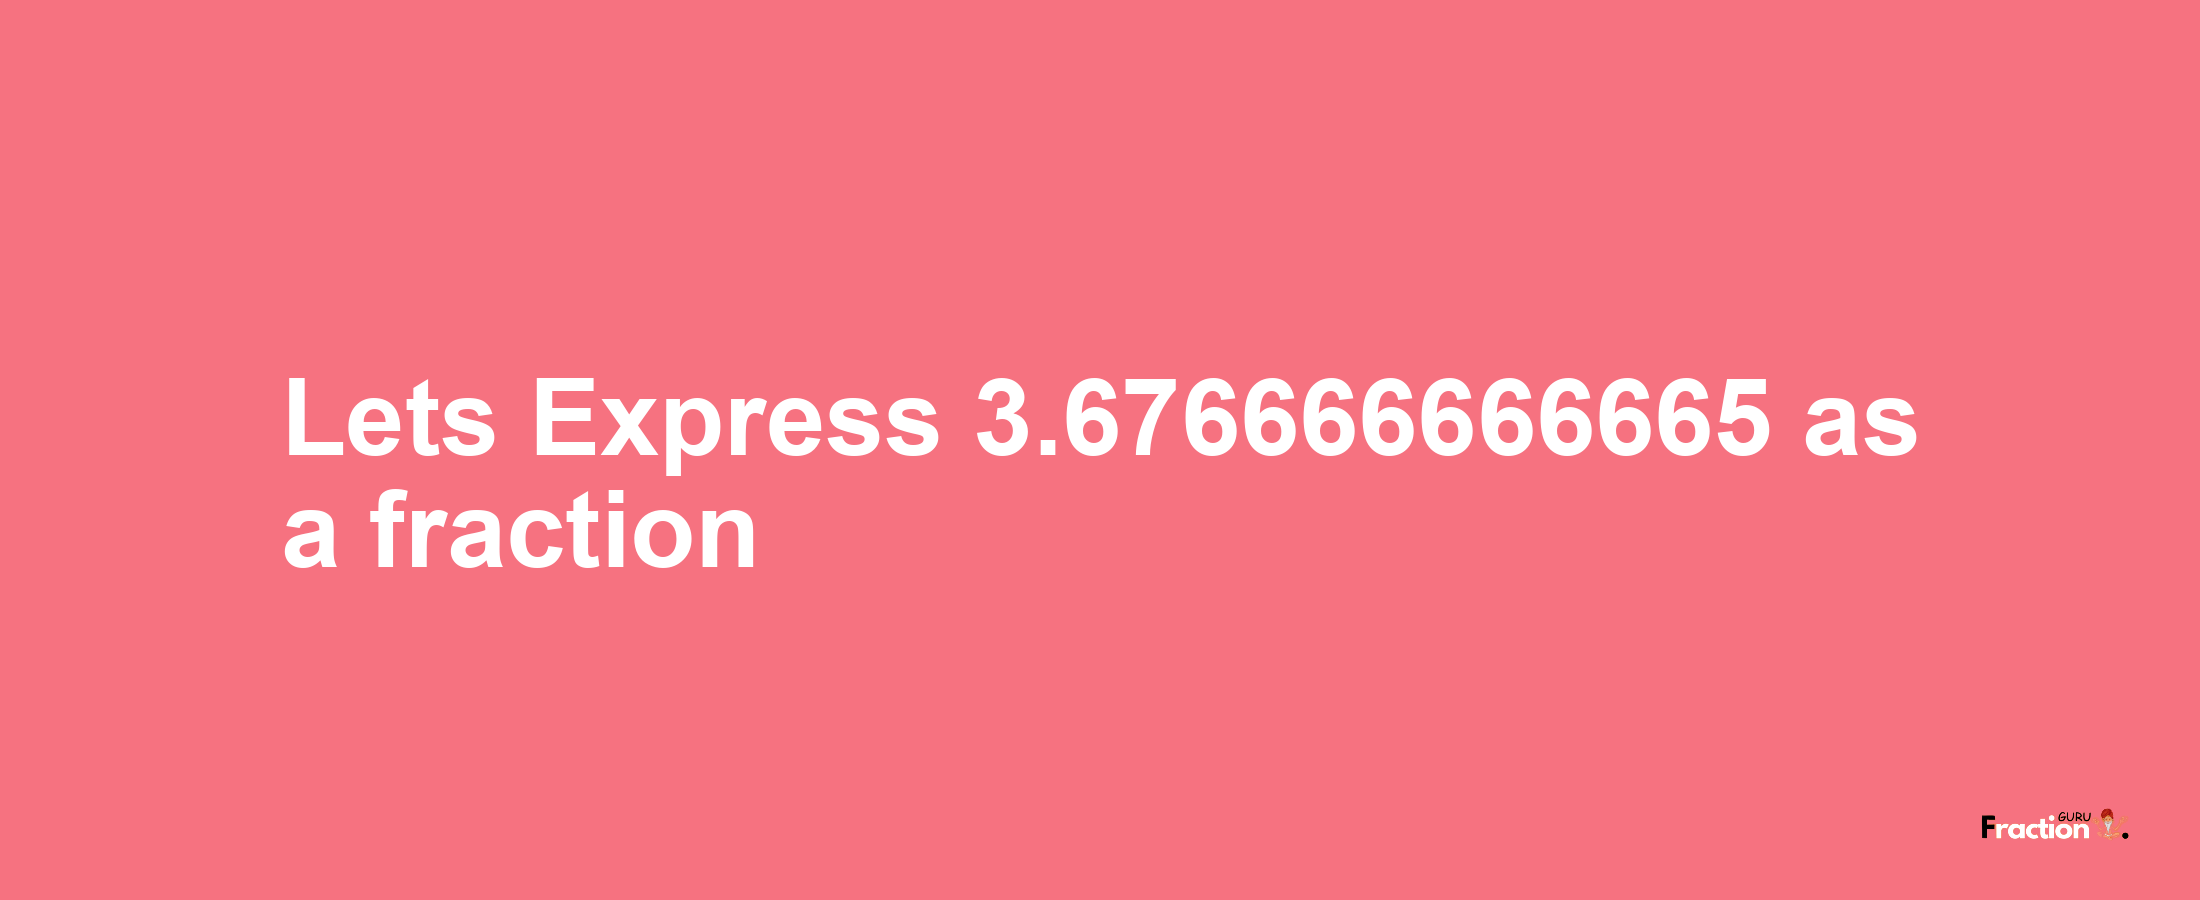 Lets Express 3.676666666665 as afraction